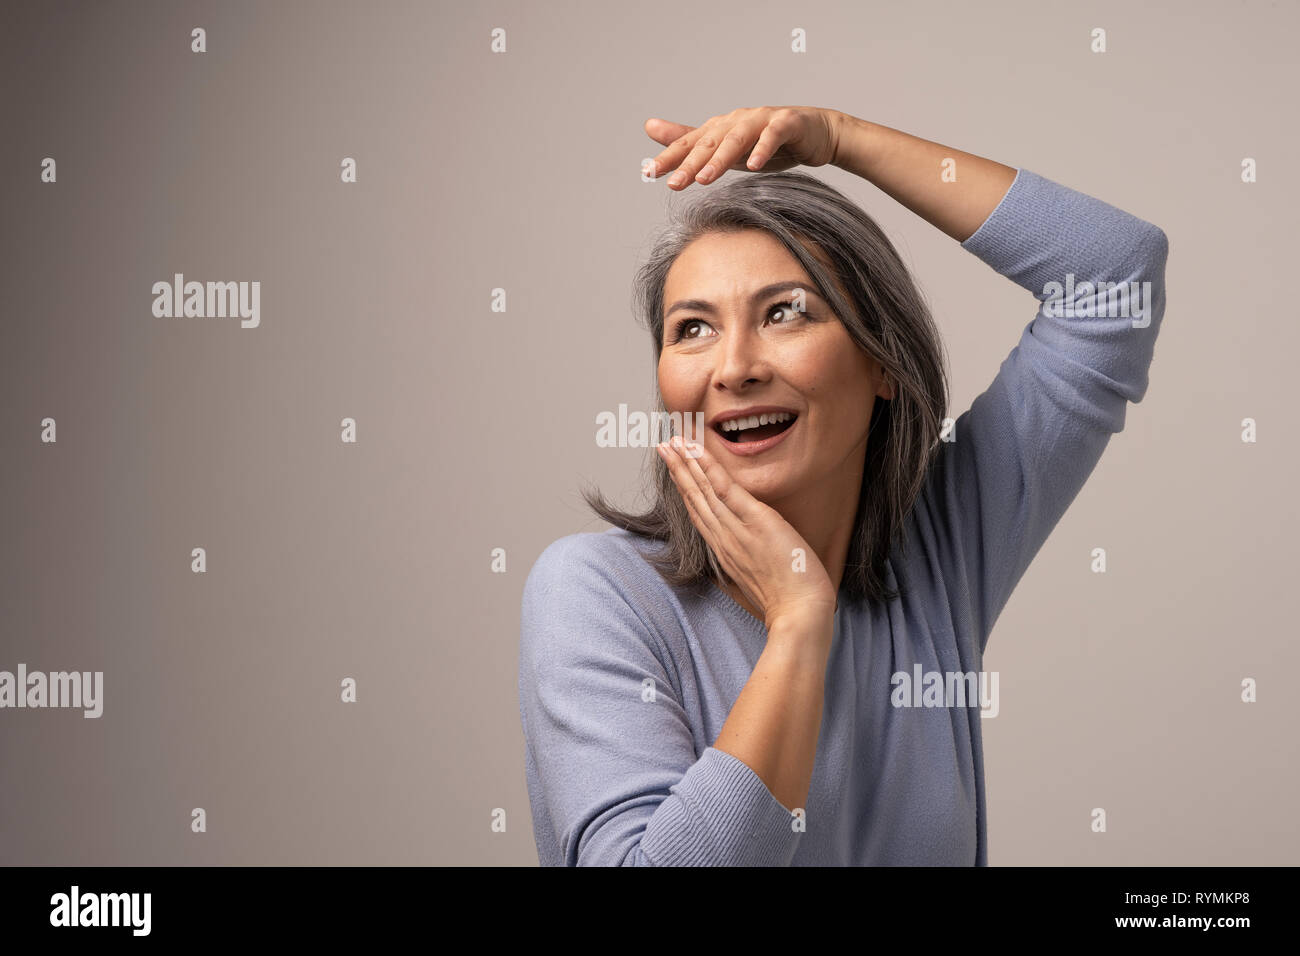 Happy Woman with Gray Hair Mongolian Appearance on Gray Background. Stock Photo